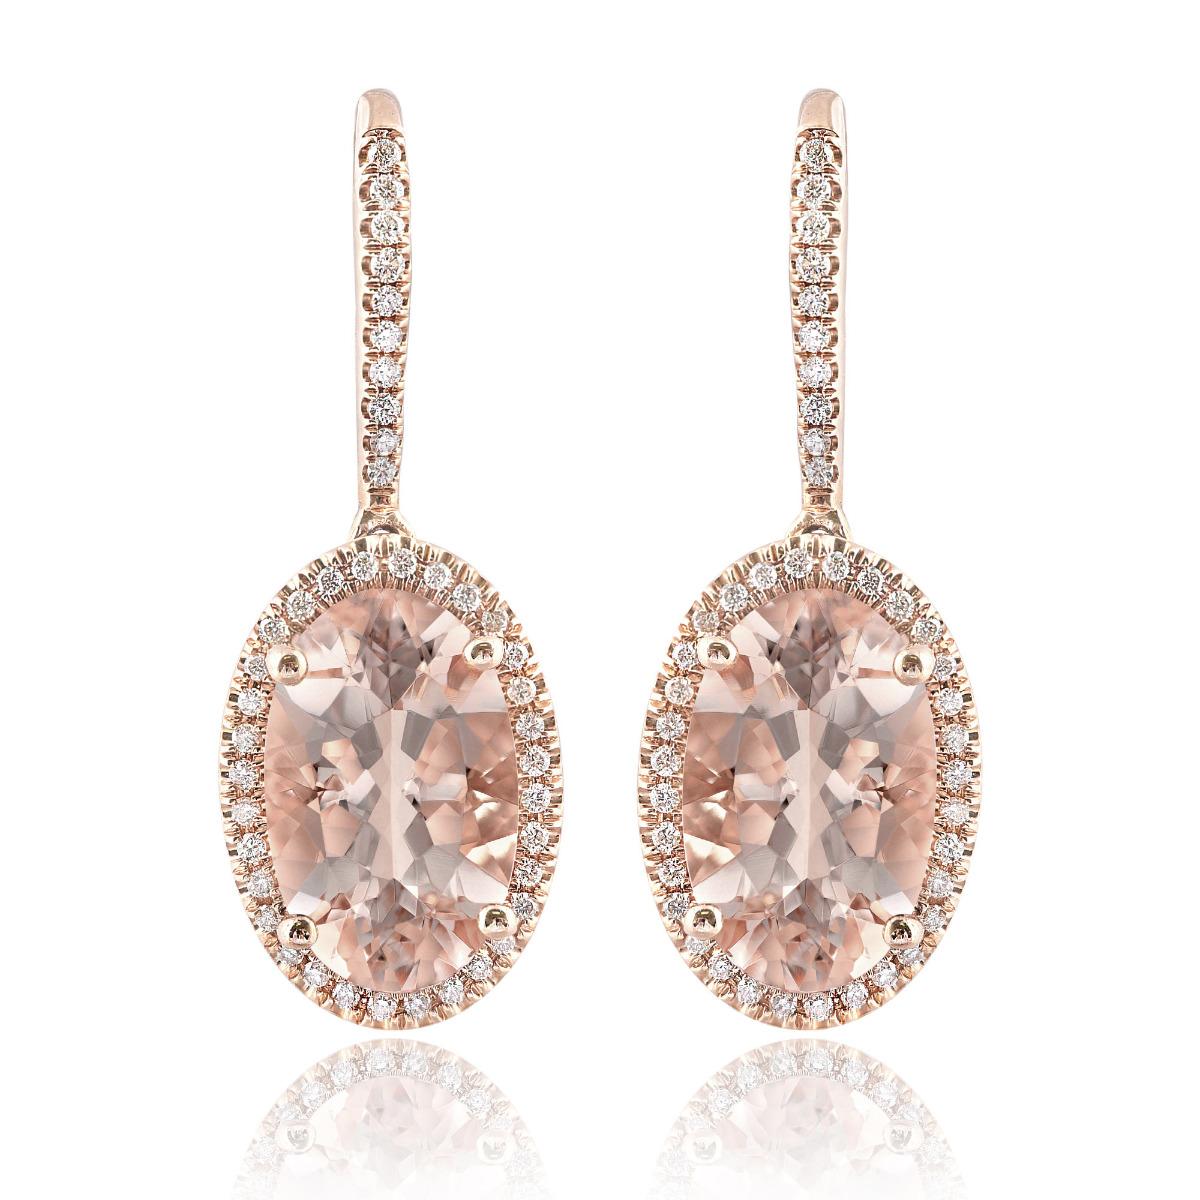 Lovely gemstones set in rose gold, these 6.21 carats mystical Morganites add a touch of fresh sexiness to these earrings. Set in 14K Gold, there will be no denying the durability of these earrings paired with the everlasting salmon colored beryl.